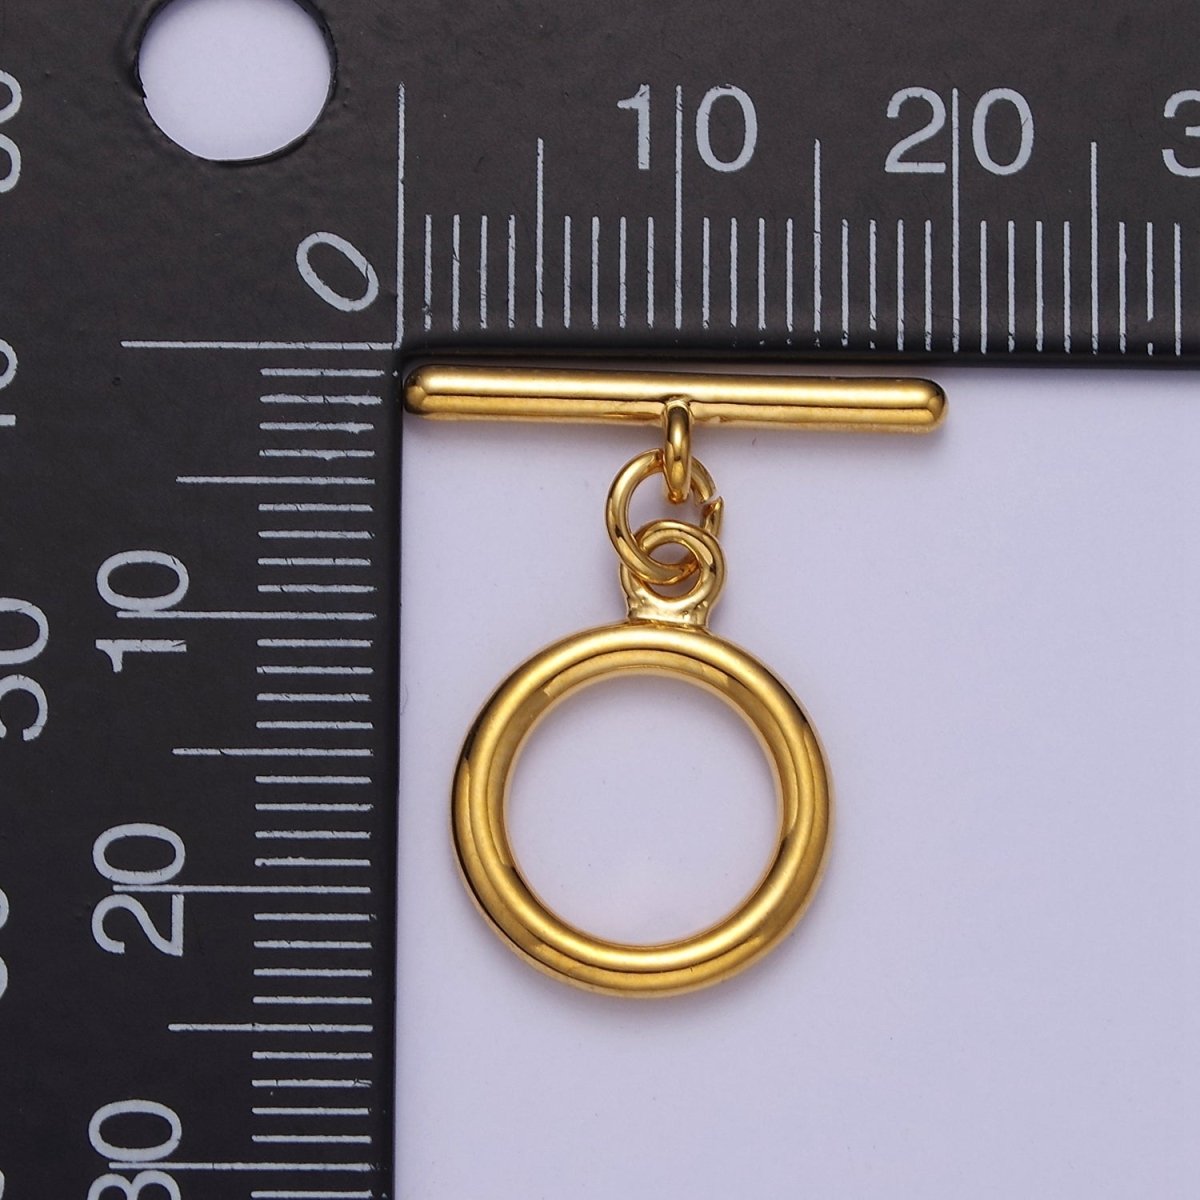 Classic 24k Gold Filled Round Toggle Clasp, Jewelry Clasp OT Clasp Findings L-708~L-710 - DLUXCA